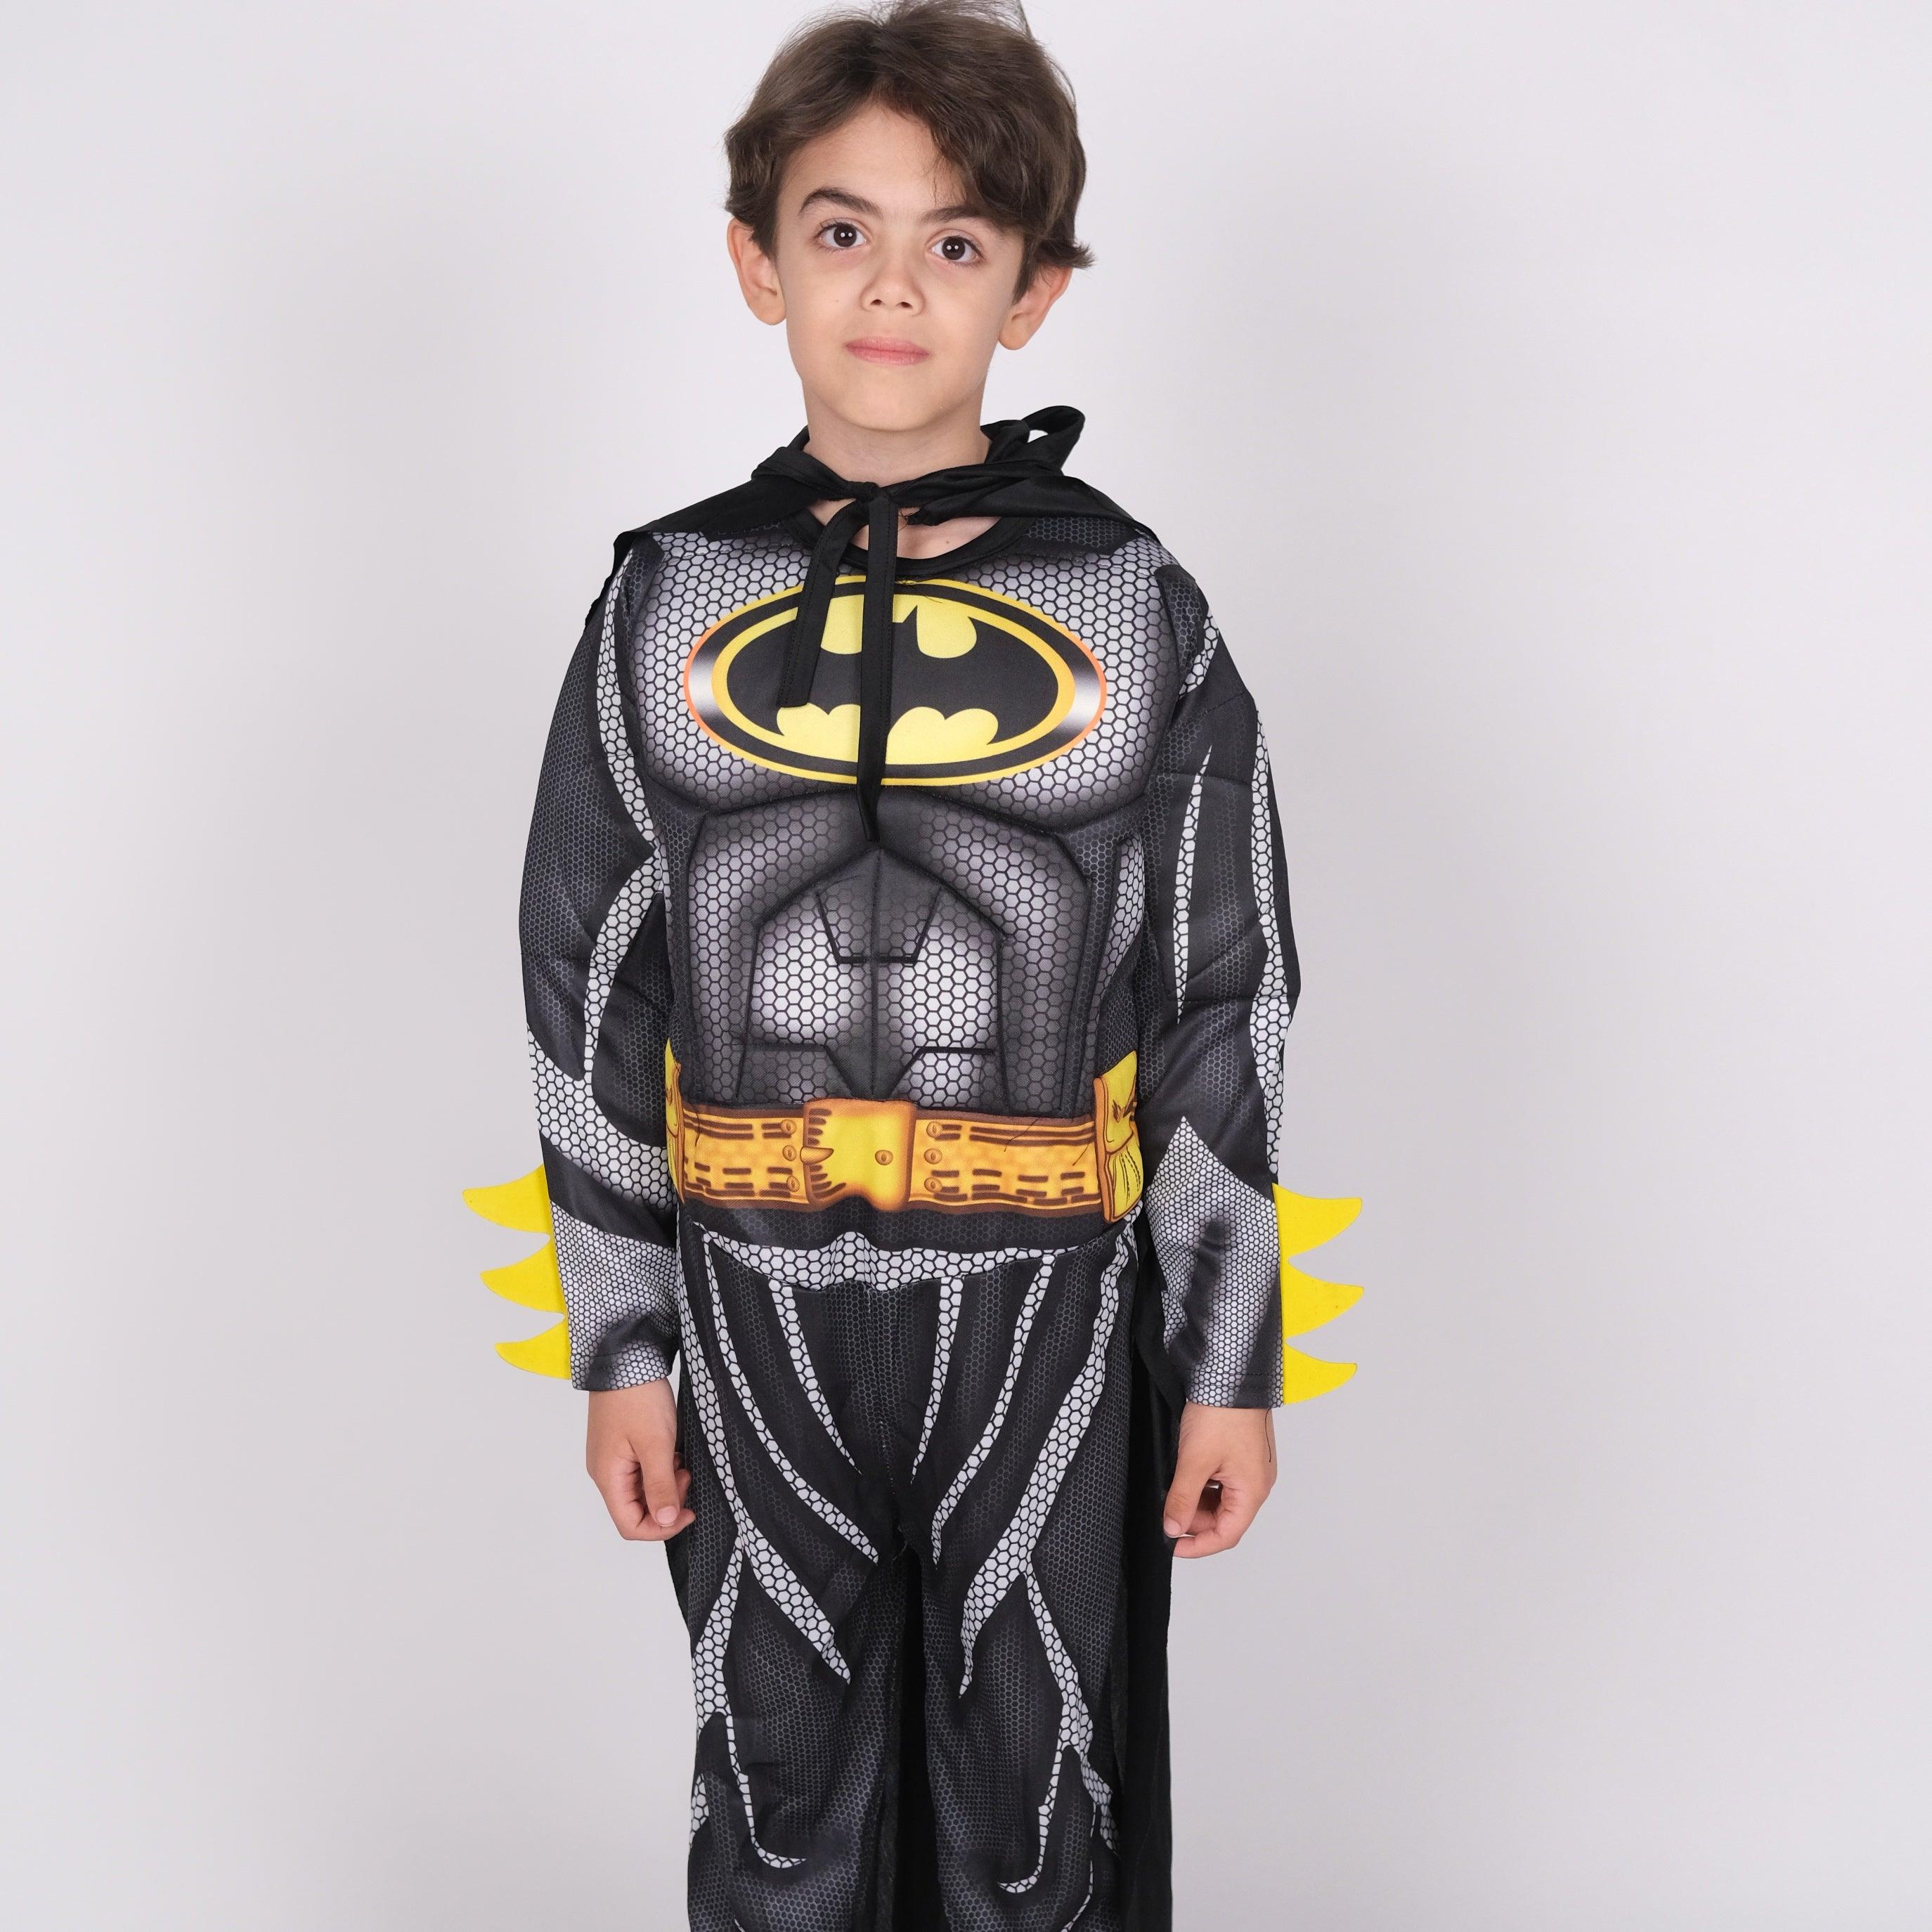 Batman Costume - Ourkids - The Party Animals